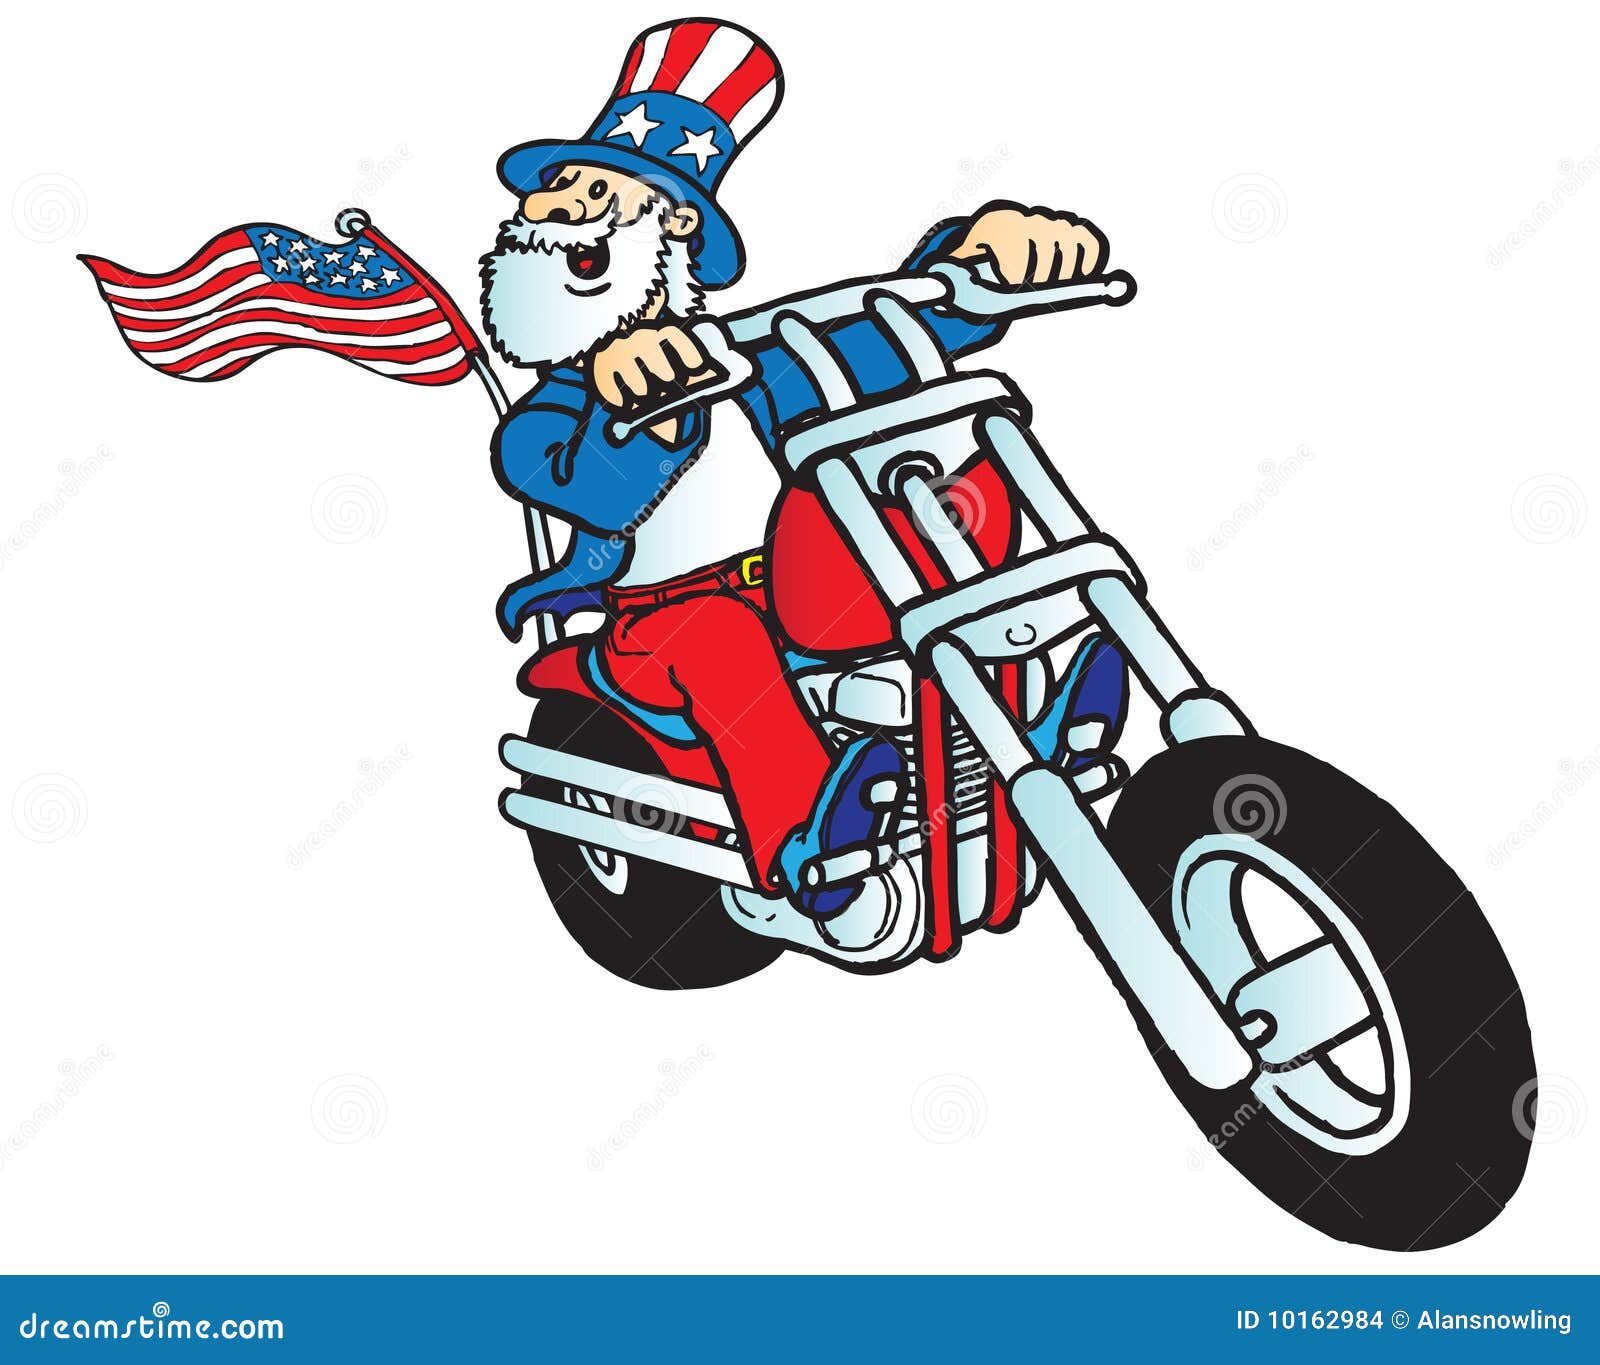 UNCLE SAM AMERICAN BIRTH BIKER BY CHOICE 3 X 5 MOTORCYCLE DELUXE  FLAG #481 NEW 